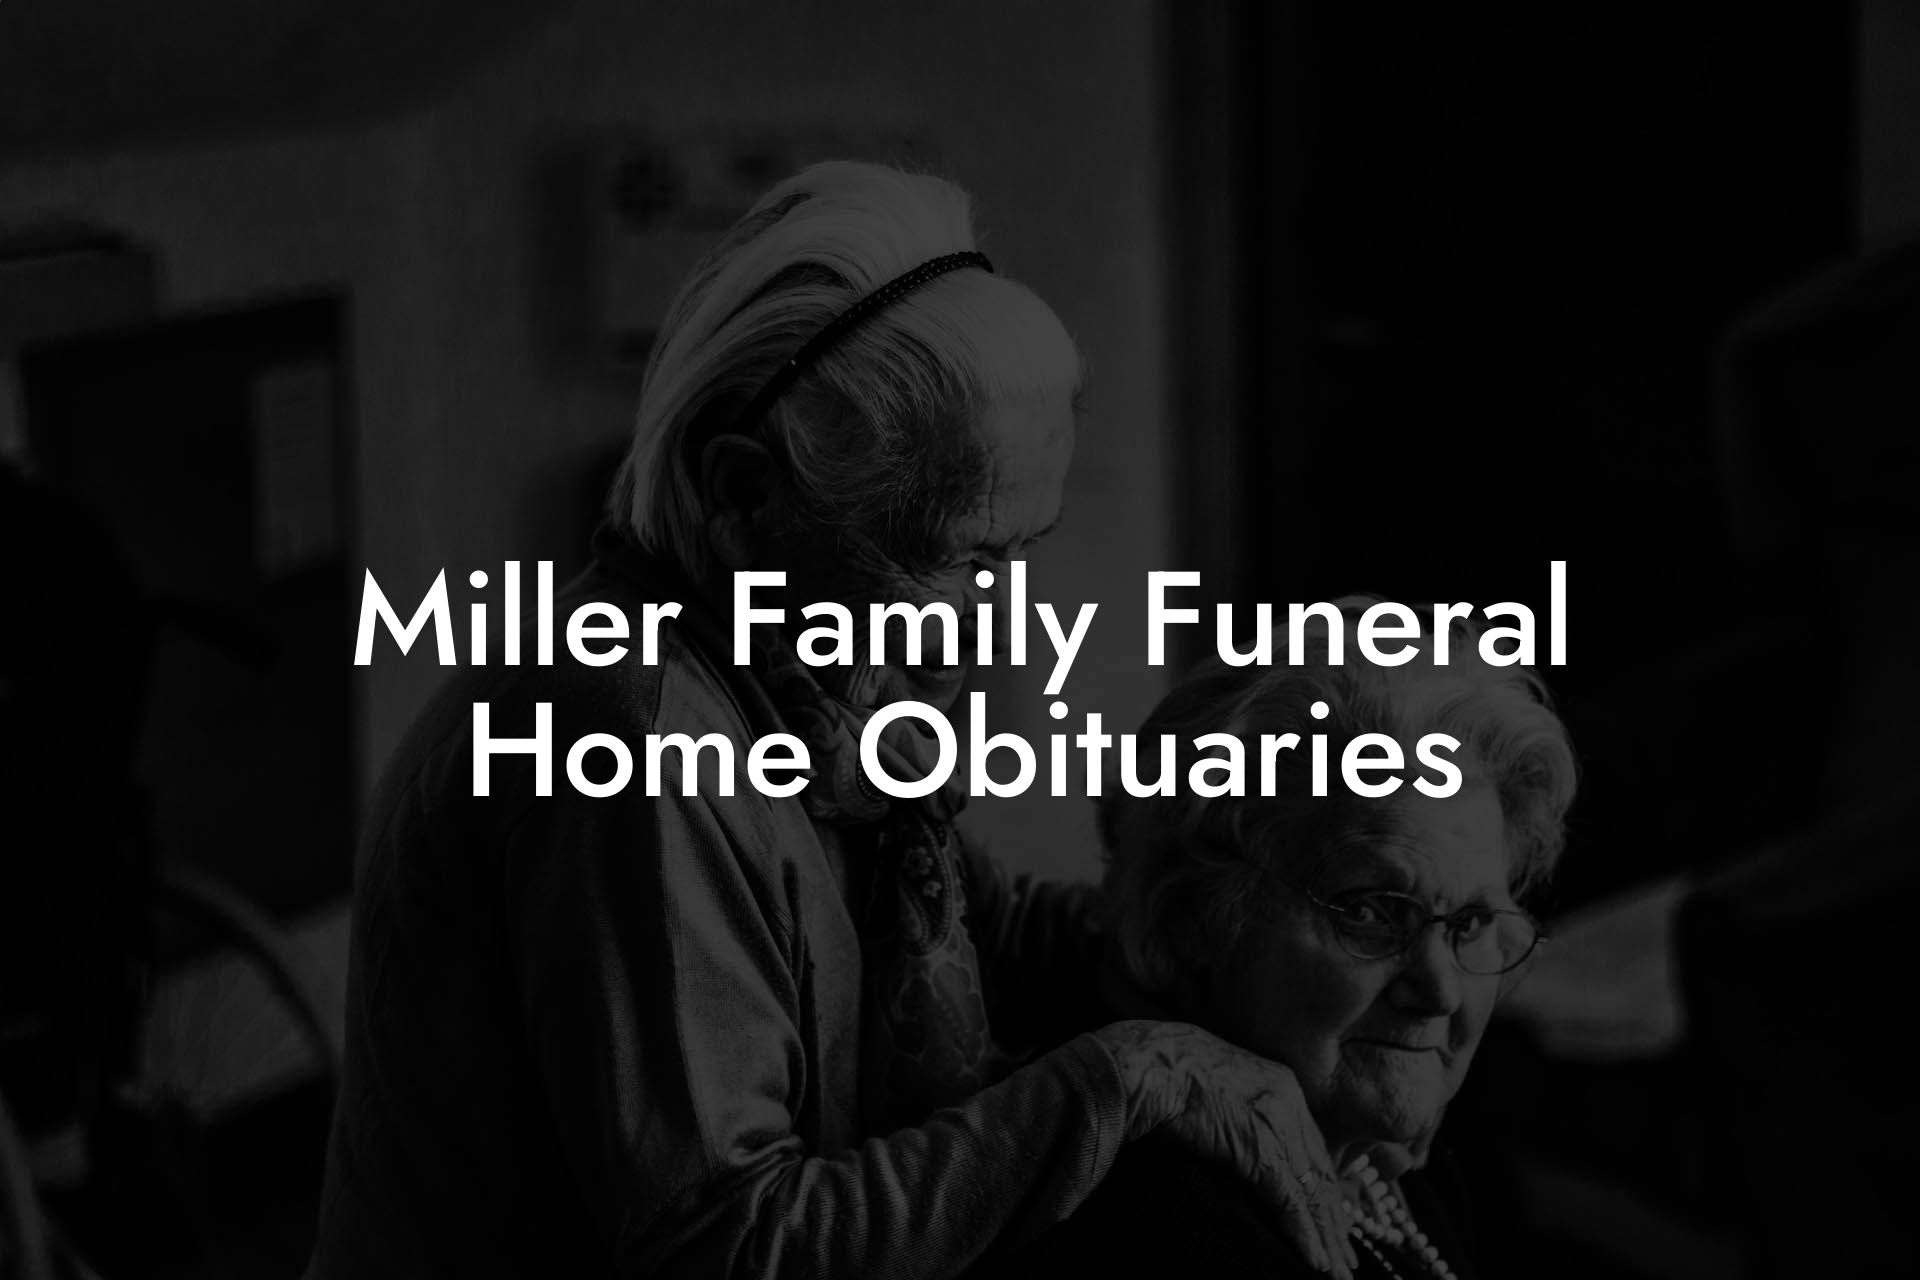 Miller Family Funeral Home Obituaries